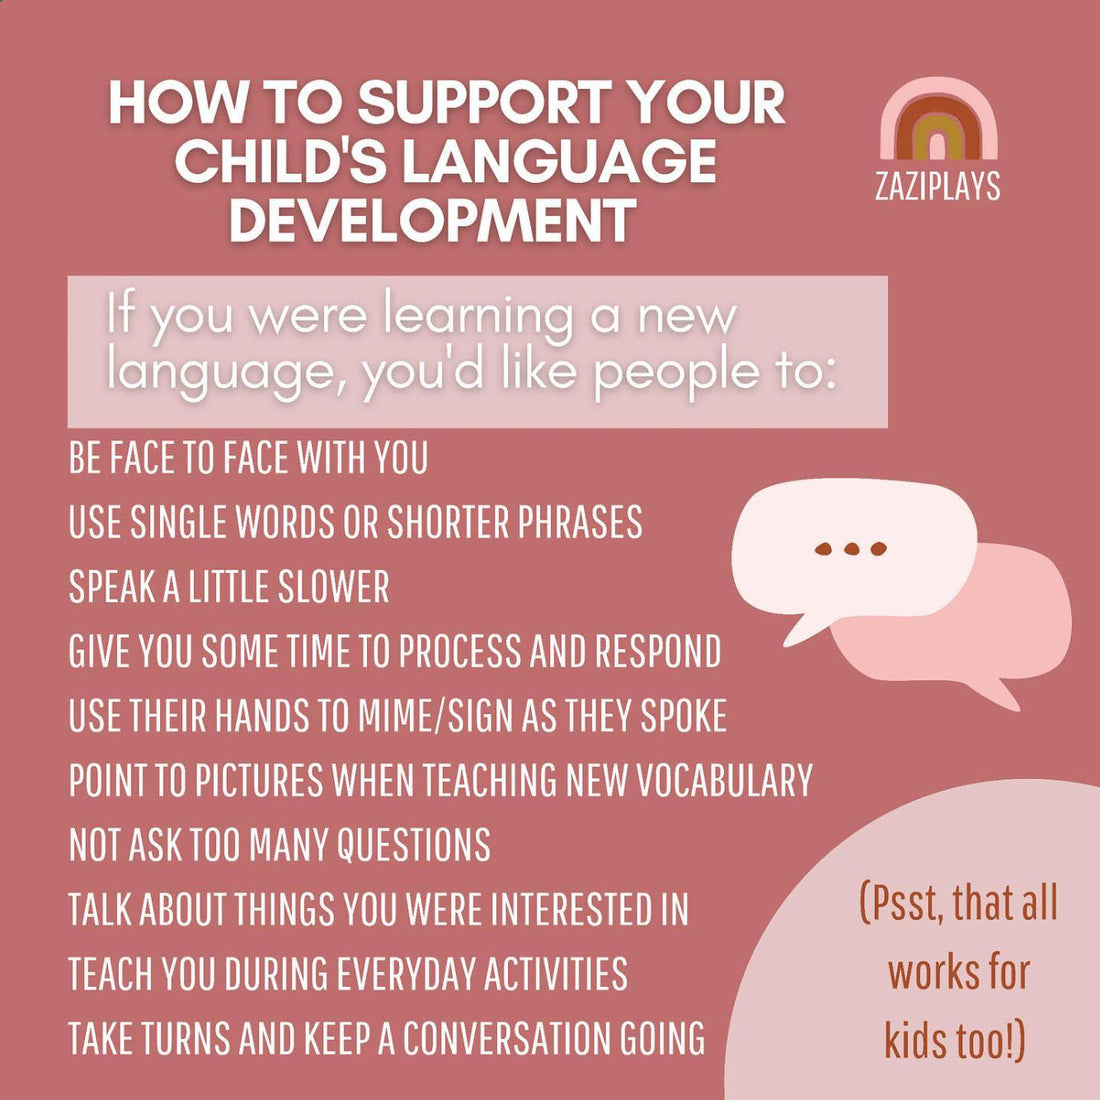 How to Support your Child's Language Development